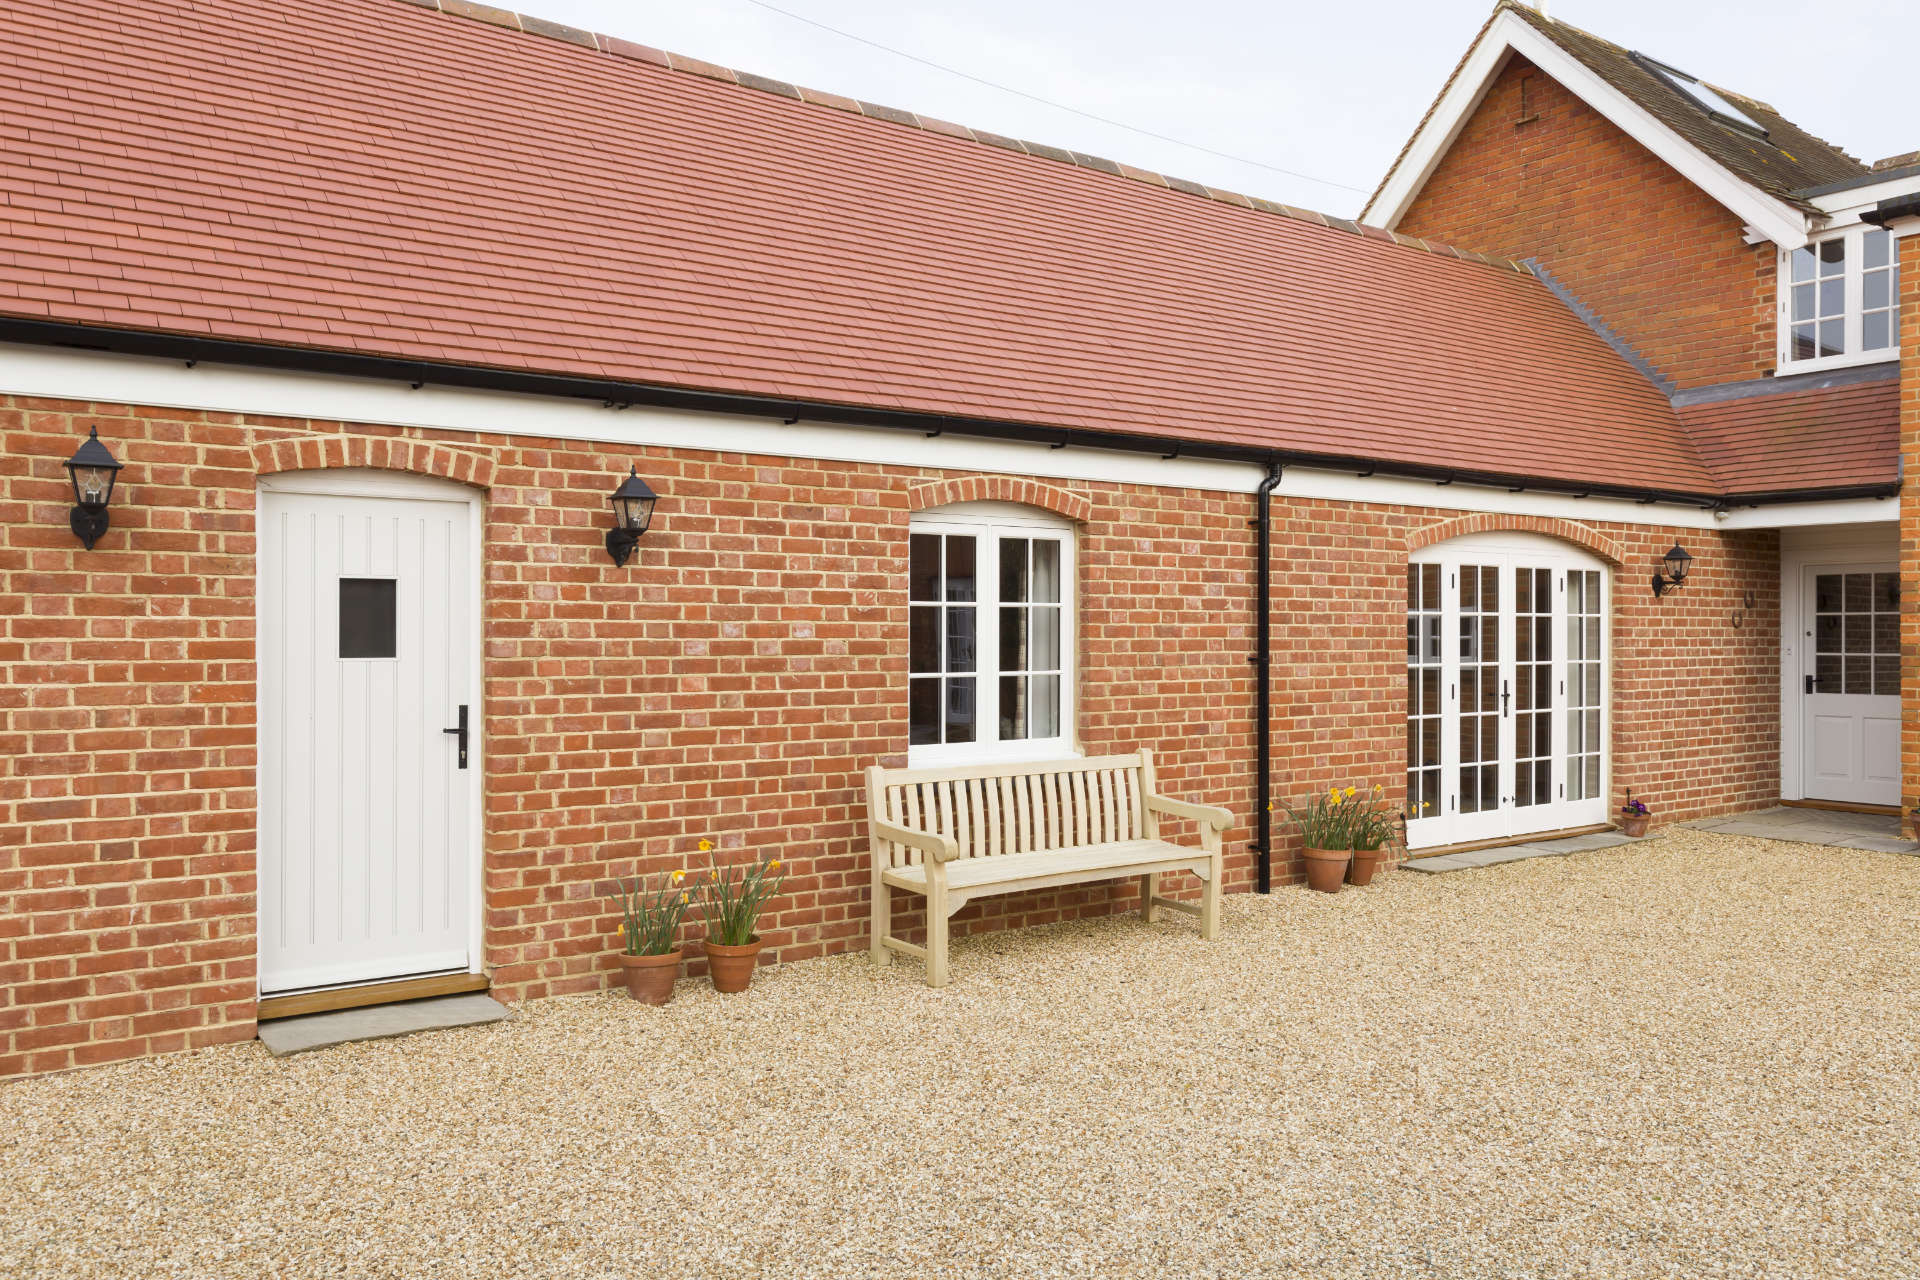 Home extension or addition, UK barn conversion to provide a single storey granny annexe, annex